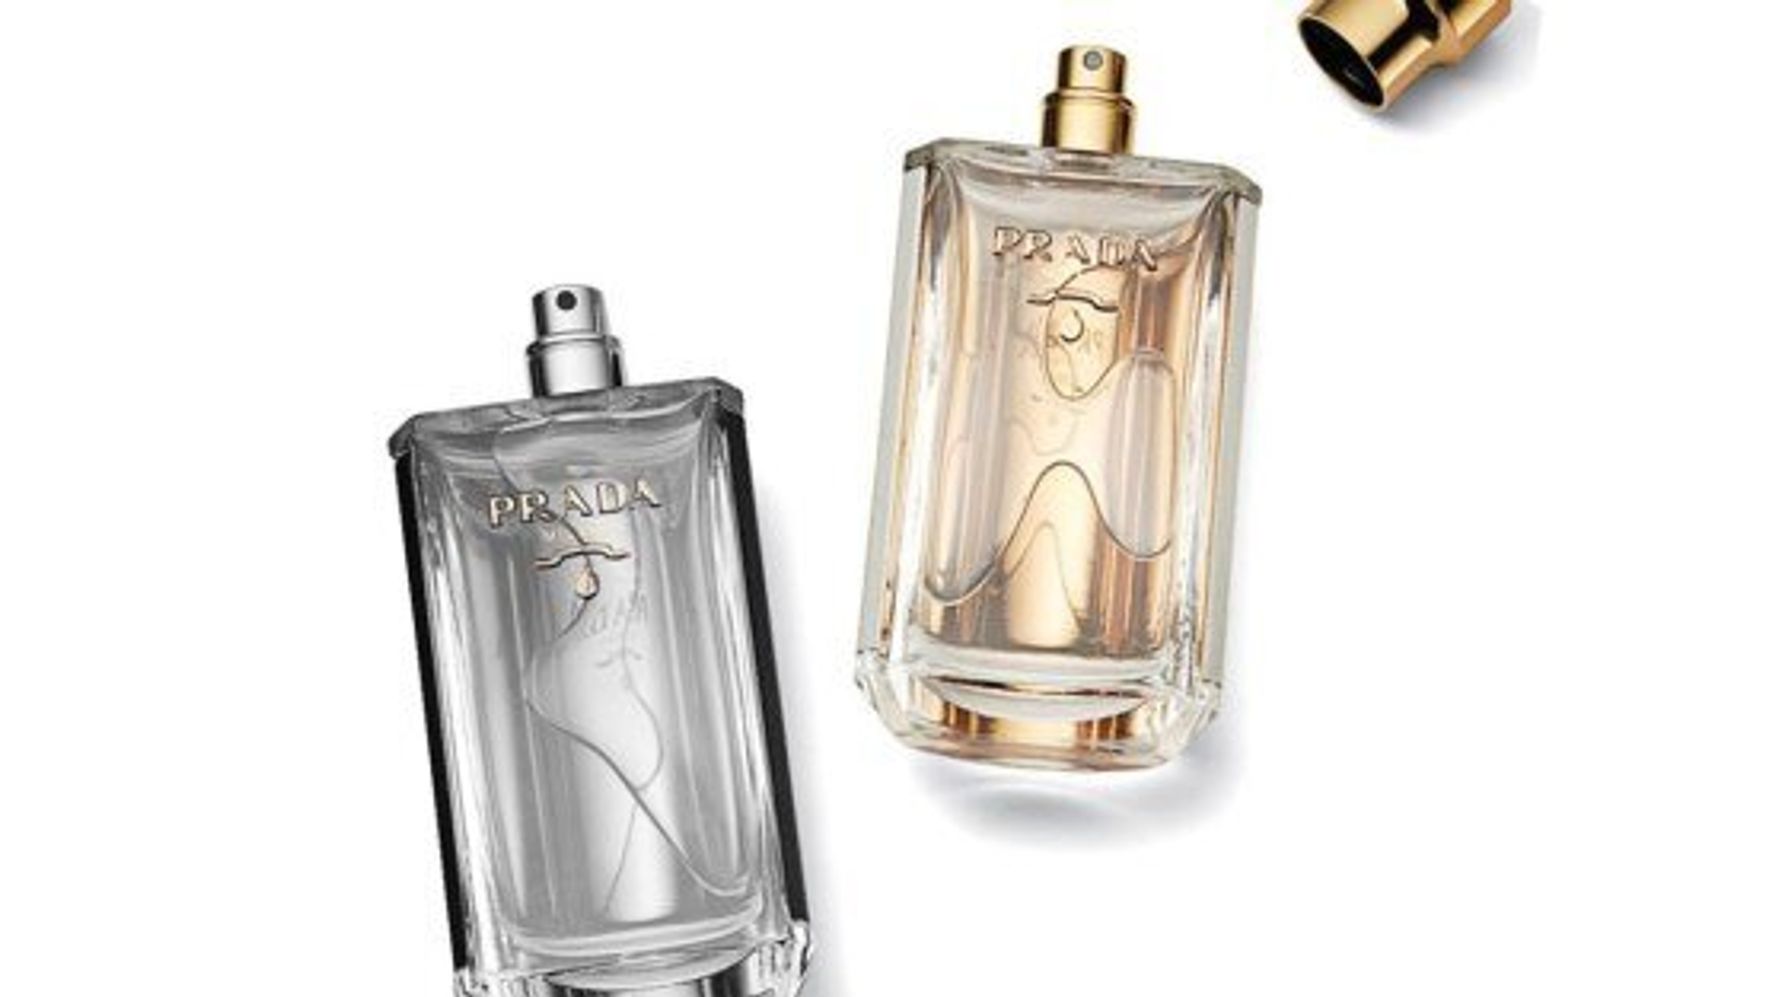 Prada Embraces Gender Fluidity With New Fragrances, L'Homme And La Femme |  HuffPost Style